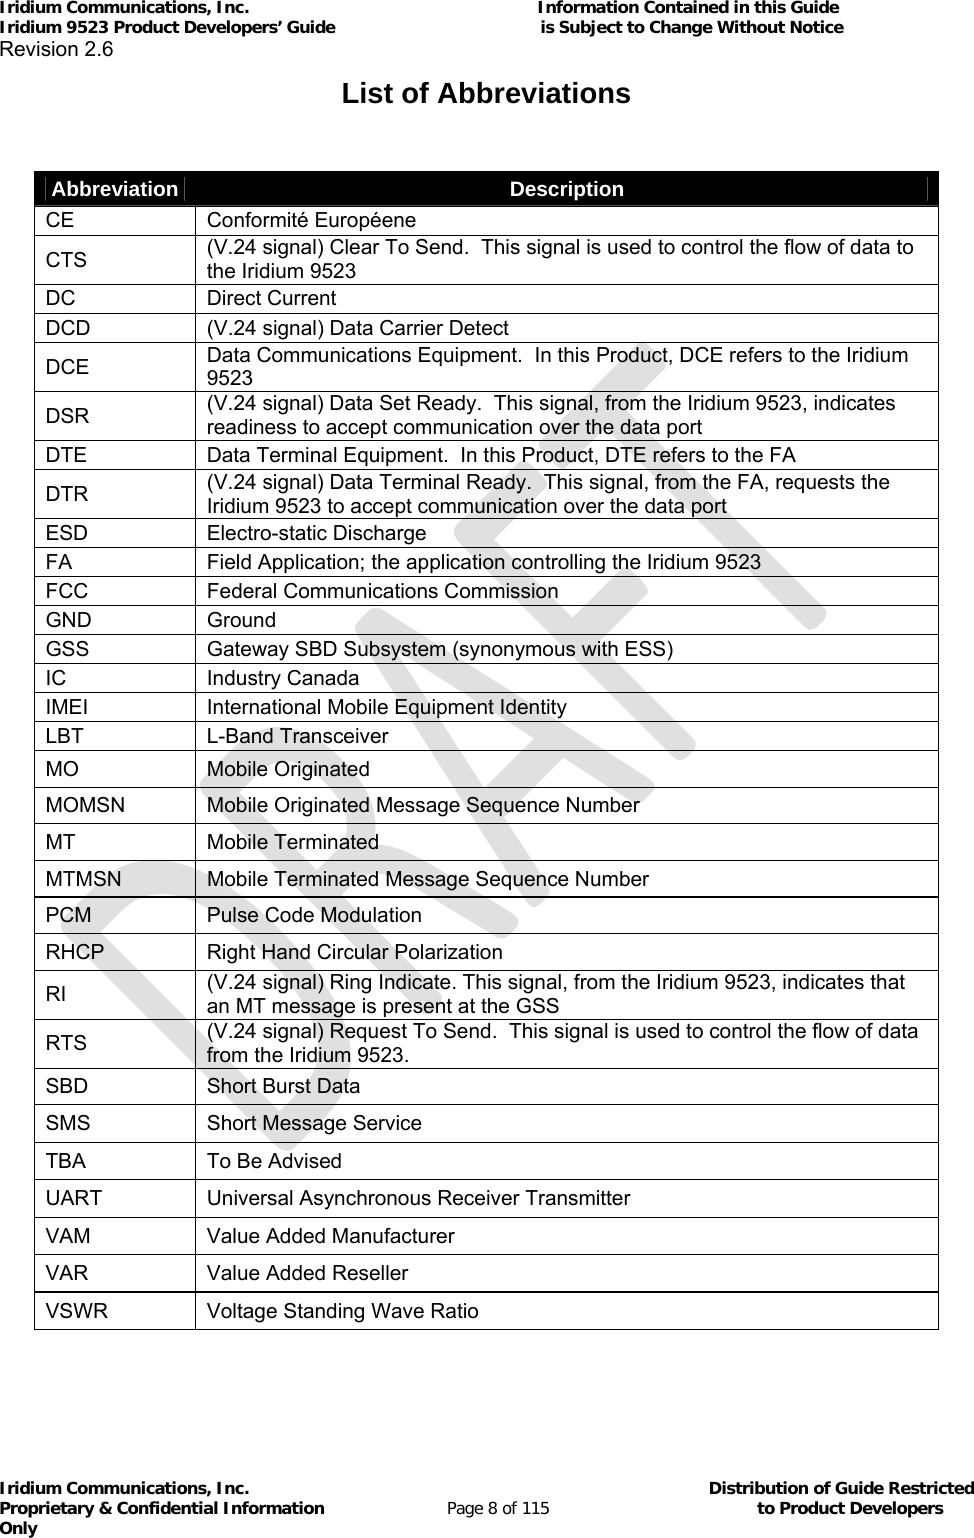 Iridium Communications, Inc.                                                           Information Contained in this Guide  Iridium 9523 Product Developers’ Guide                                          is Subject to Change Without Notice  Revision 2.6 Iridium Communications, Inc.                                          Distribution of Guide Restricted Proprietary &amp; Confidential Information                         Page 8 of 115                                        to Product Developers Only           List of Abbreviations  Abbreviation  Description CE Conformité Européene CTS  (V.24 signal) Clear To Send.  This signal is used to control the flow of data to the Iridium 9523 DC Direct Current DCD  (V.24 signal) Data Carrier Detect DCE  Data Communications Equipment.  In this Product, DCE refers to the Iridium 9523 DSR  (V.24 signal) Data Set Ready.  This signal, from the Iridium 9523, indicates readiness to accept communication over the data port DTE  Data Terminal Equipment.  In this Product, DTE refers to the FA DTR  (V.24 signal) Data Terminal Ready.  This signal, from the FA, requests the Iridium 9523 to accept communication over the data port ESD Electro-static Discharge FA  Field Application; the application controlling the Iridium 9523 FCC  Federal Communications Commission GND Ground GSS  Gateway SBD Subsystem (synonymous with ESS) IC Industry Canada IMEI  International Mobile Equipment Identity LBT L-Band Transceiver MO Mobile Originated MOMSN  Mobile Originated Message Sequence Number MT Mobile Terminated MTMSN  Mobile Terminated Message Sequence Number PCM Pulse Code Modulation RHCP  Right Hand Circular Polarization  RI  (V.24 signal) Ring Indicate. This signal, from the Iridium 9523, indicates that an MT message is present at the GSS RTS  (V.24 signal) Request To Send.  This signal is used to control the flow of data from the Iridium 9523. SBD  Short Burst Data SMS  Short Message Service TBA  To Be Advised UART  Universal Asynchronous Receiver Transmitter VAM  Value Added Manufacturer VAR  Value Added Reseller VSWR  Voltage Standing Wave Ratio  